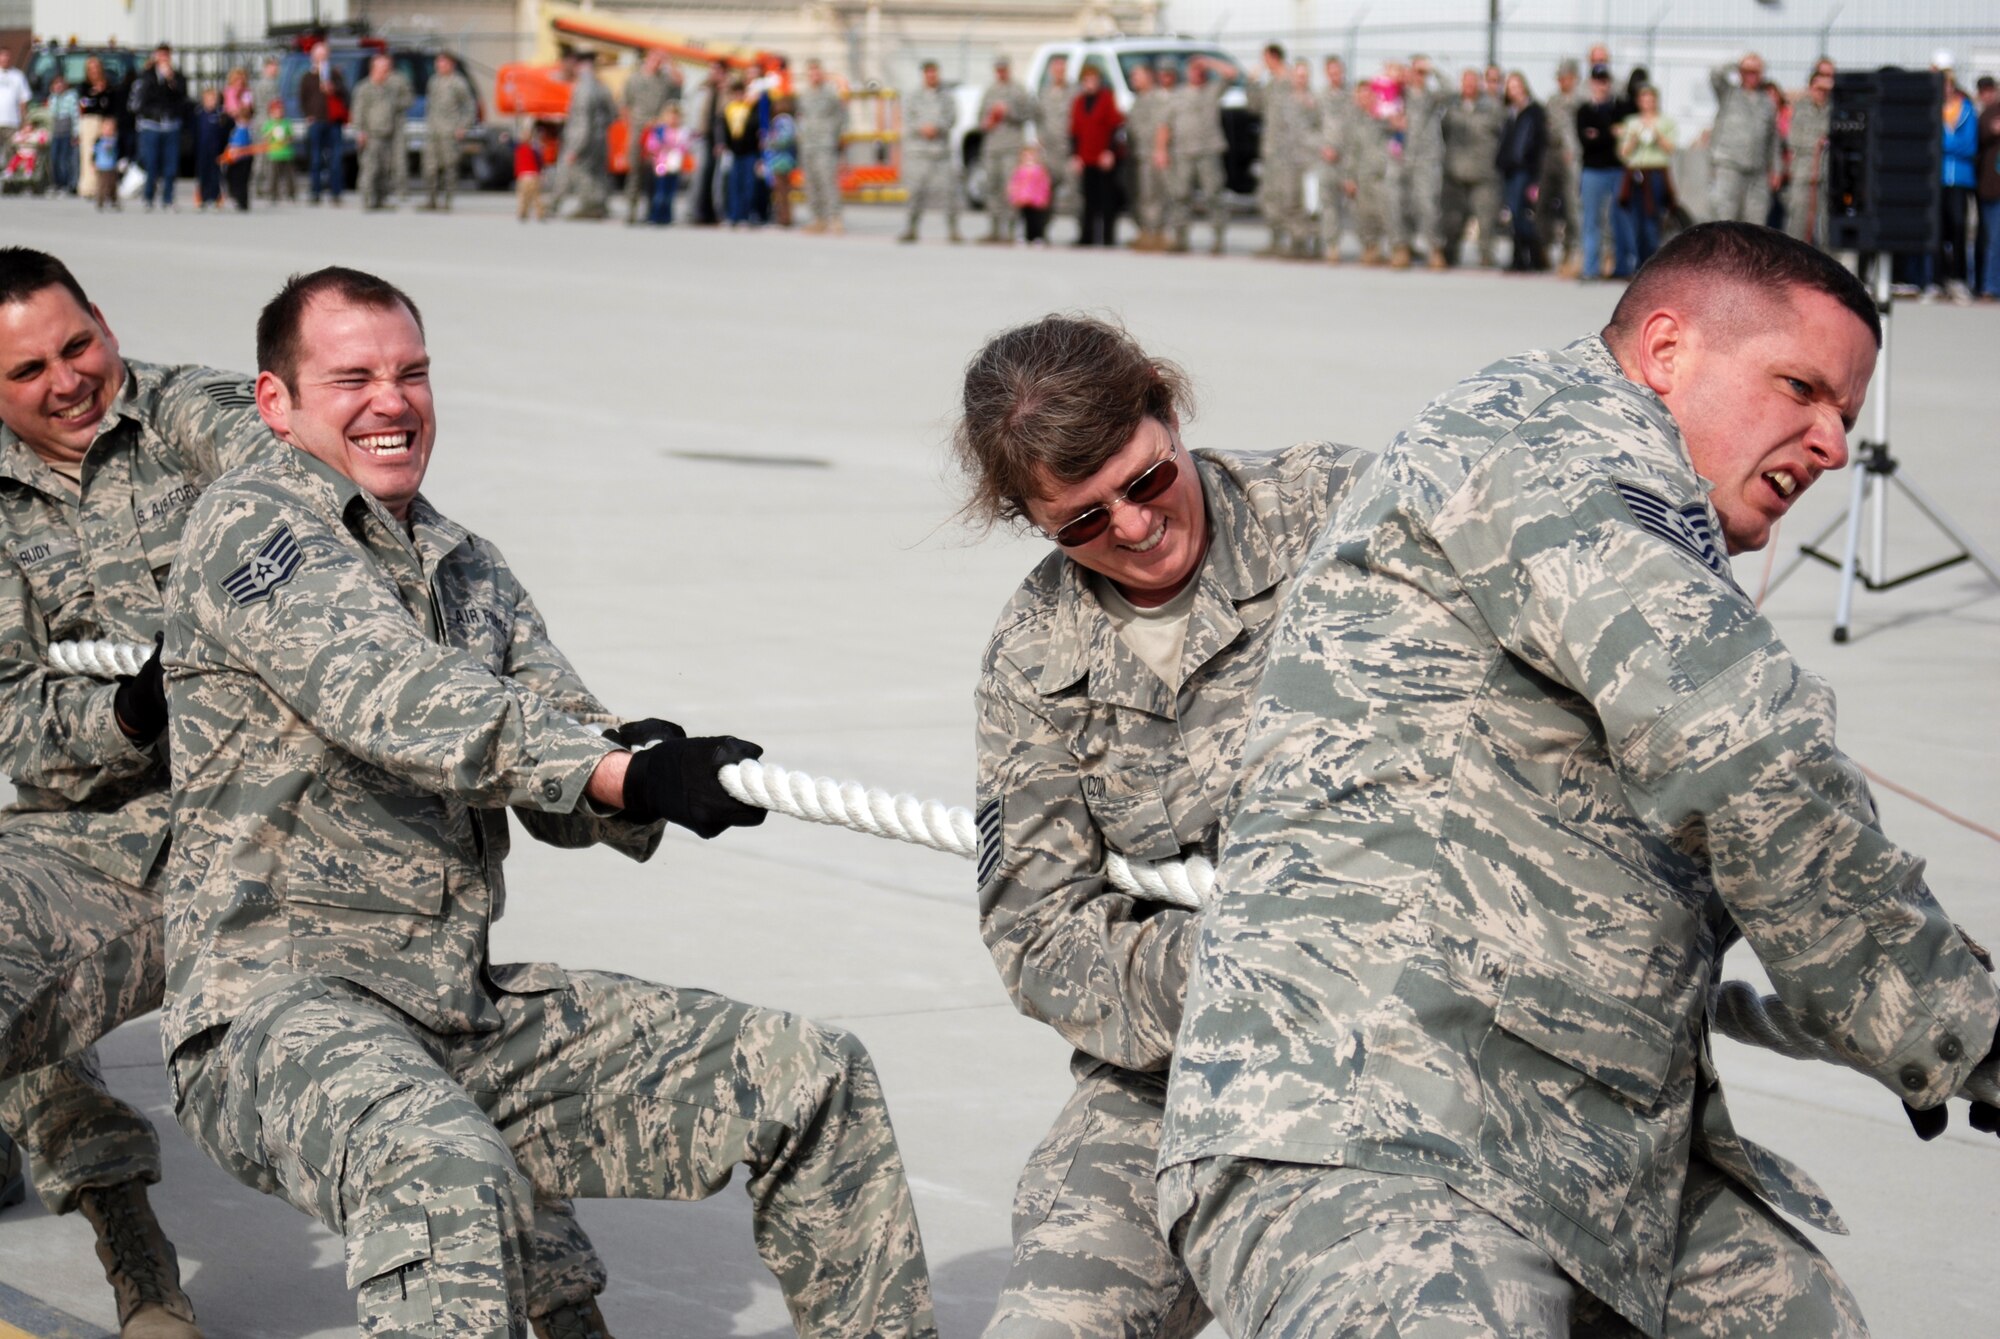 Members of the Utah Air National Guard's maintenance squadron strain to pull a KC-135 Stratotanker during Winter Wingman Day 2011 at the Utah Air National Guard base on March 12. Three teams, of 15 people each, compete against the clock to see which team can rope-pull a 120,000 pound Stratotanker, a distance of 40 feet, the fastest. (U.S. Air Force photo by Senior Master Sgt. Sterling Poulson)(RELEASED)